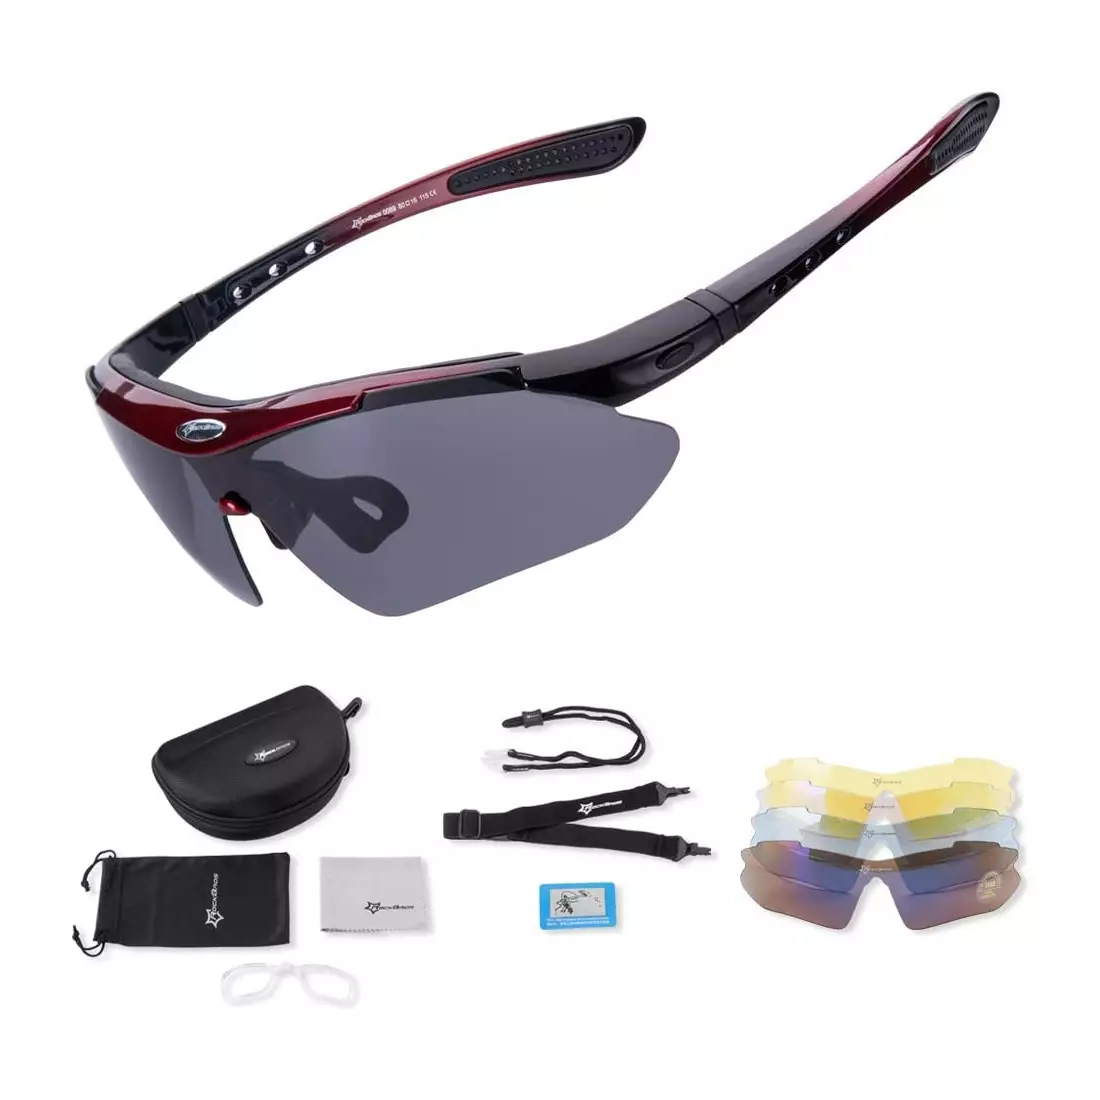 https://www.mikesport.eu/img/imagecache/20001-21000/product-media/RockBros-10001-bicycle-sports-goggles-with-polarized-5-interchangeable-lenses-black-red-78295-1100x1100.webp